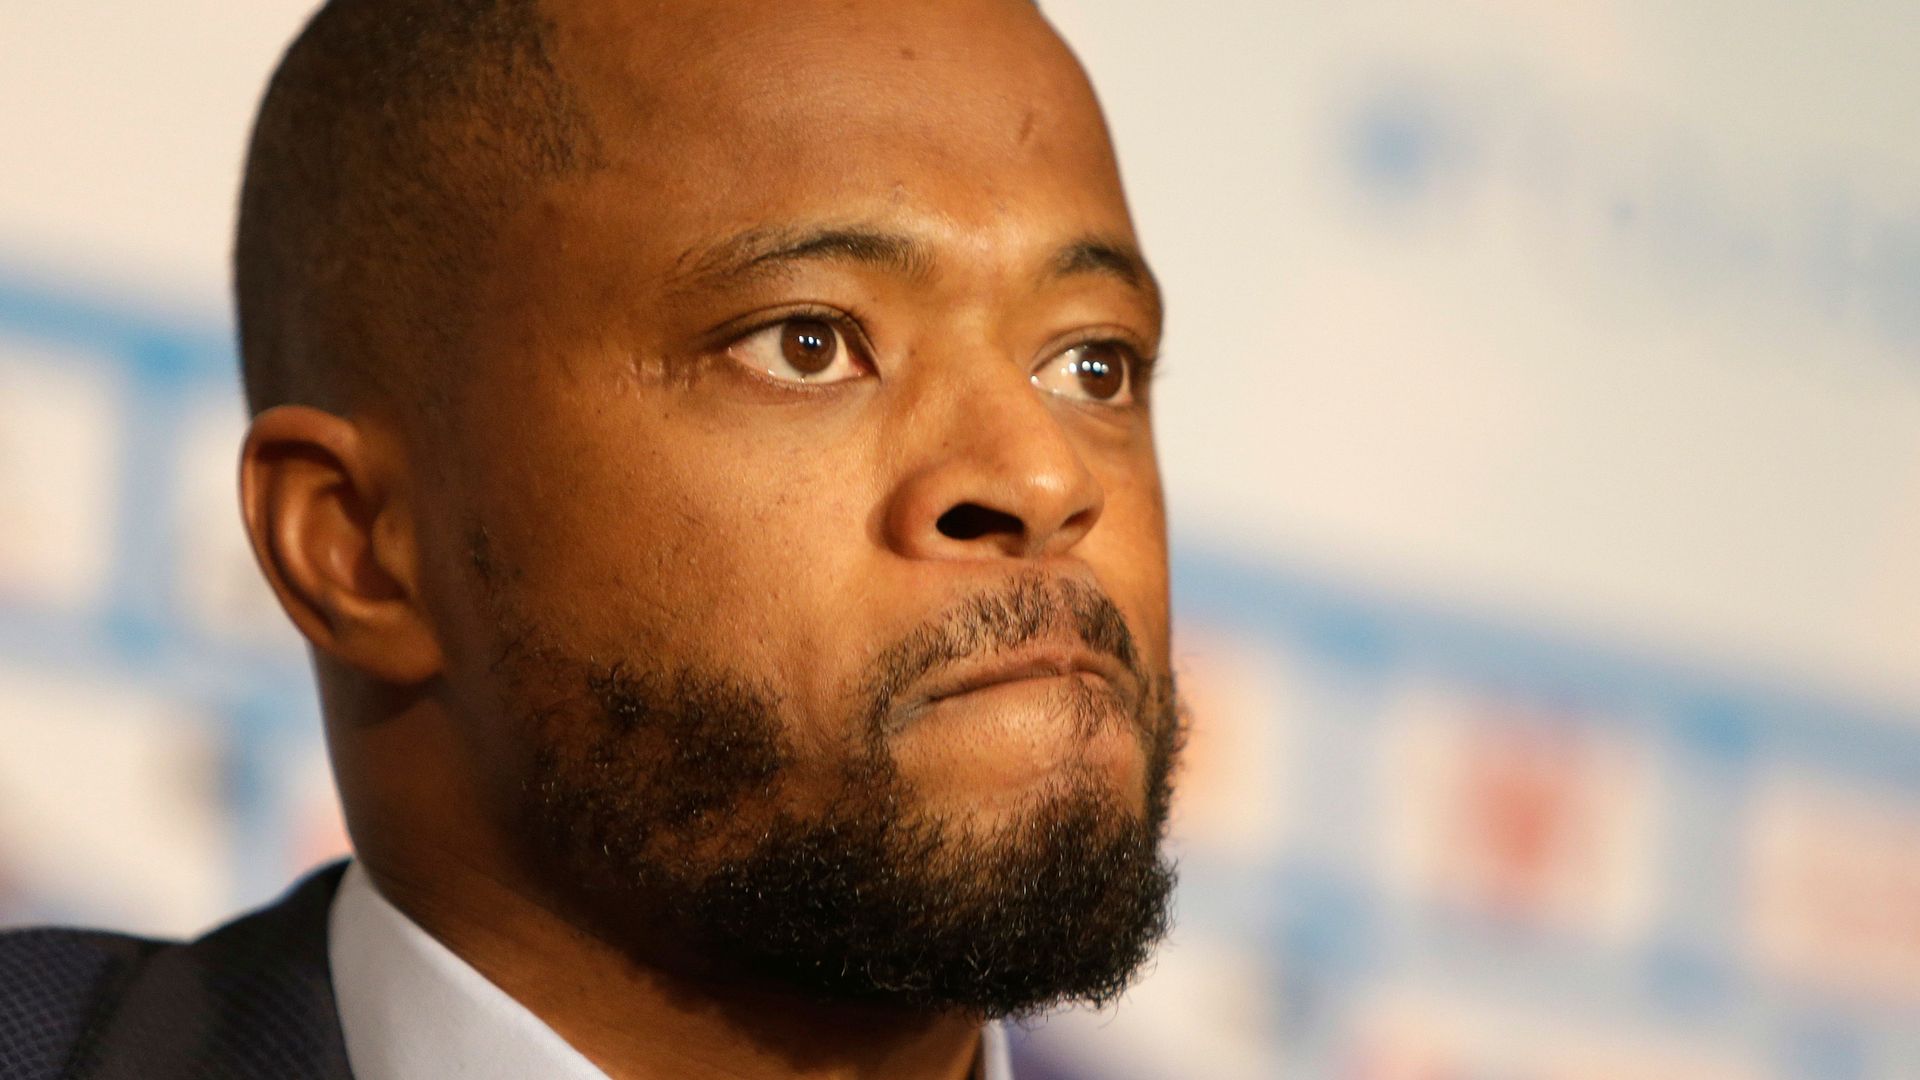 Evra wants action - 'social media allows people to spread racism'